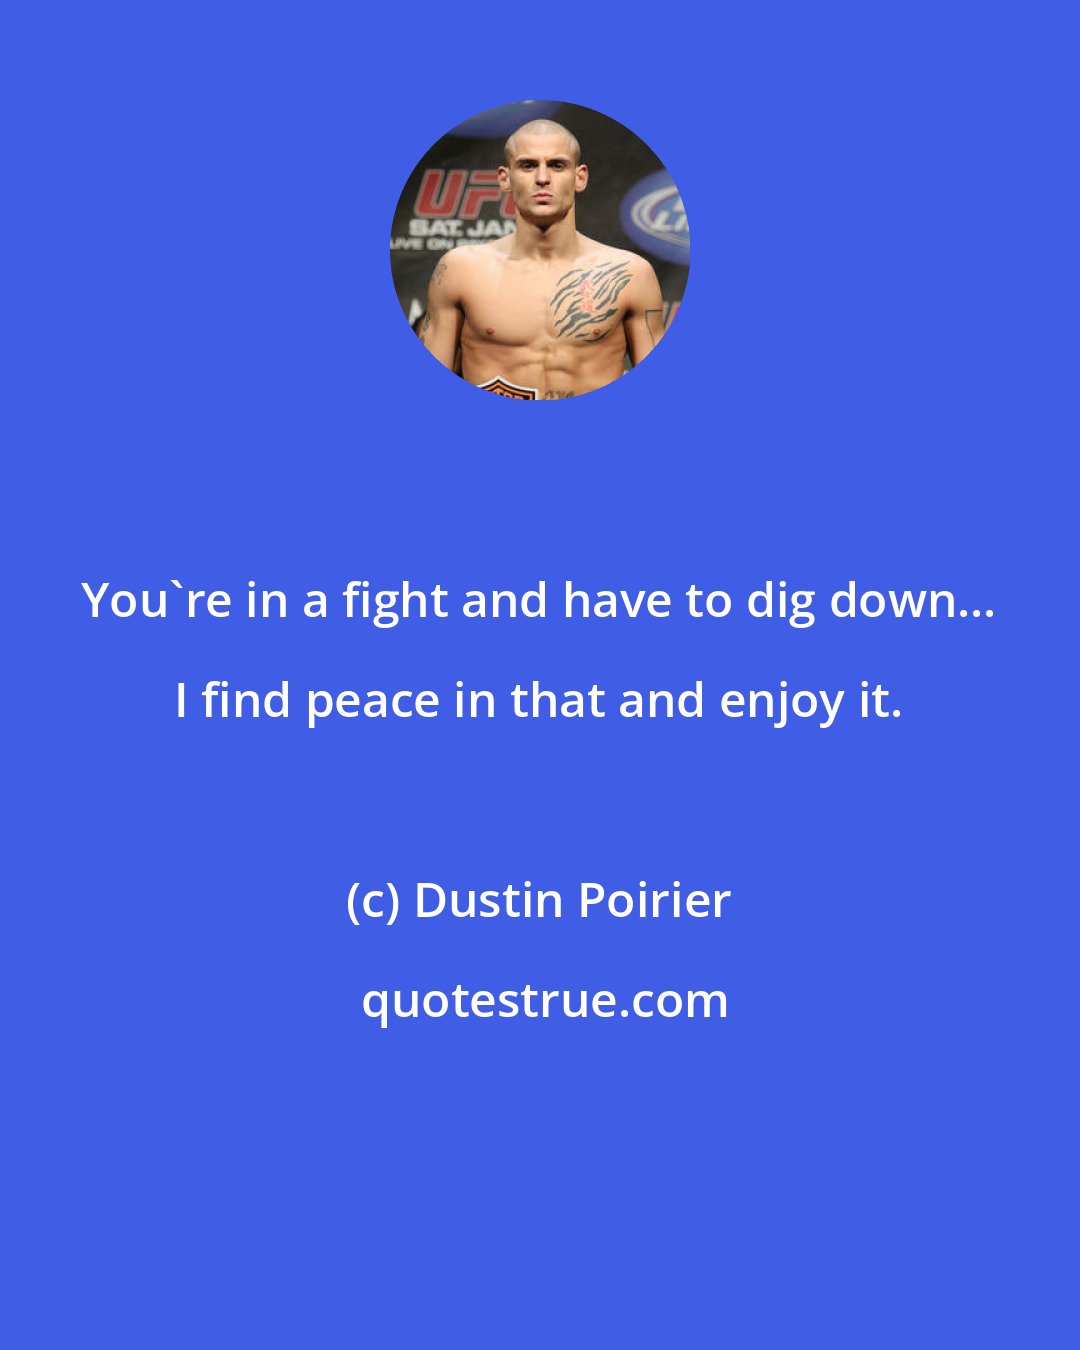 Dustin Poirier: You're in a fight and have to dig down... I find peace in that and enjoy it.